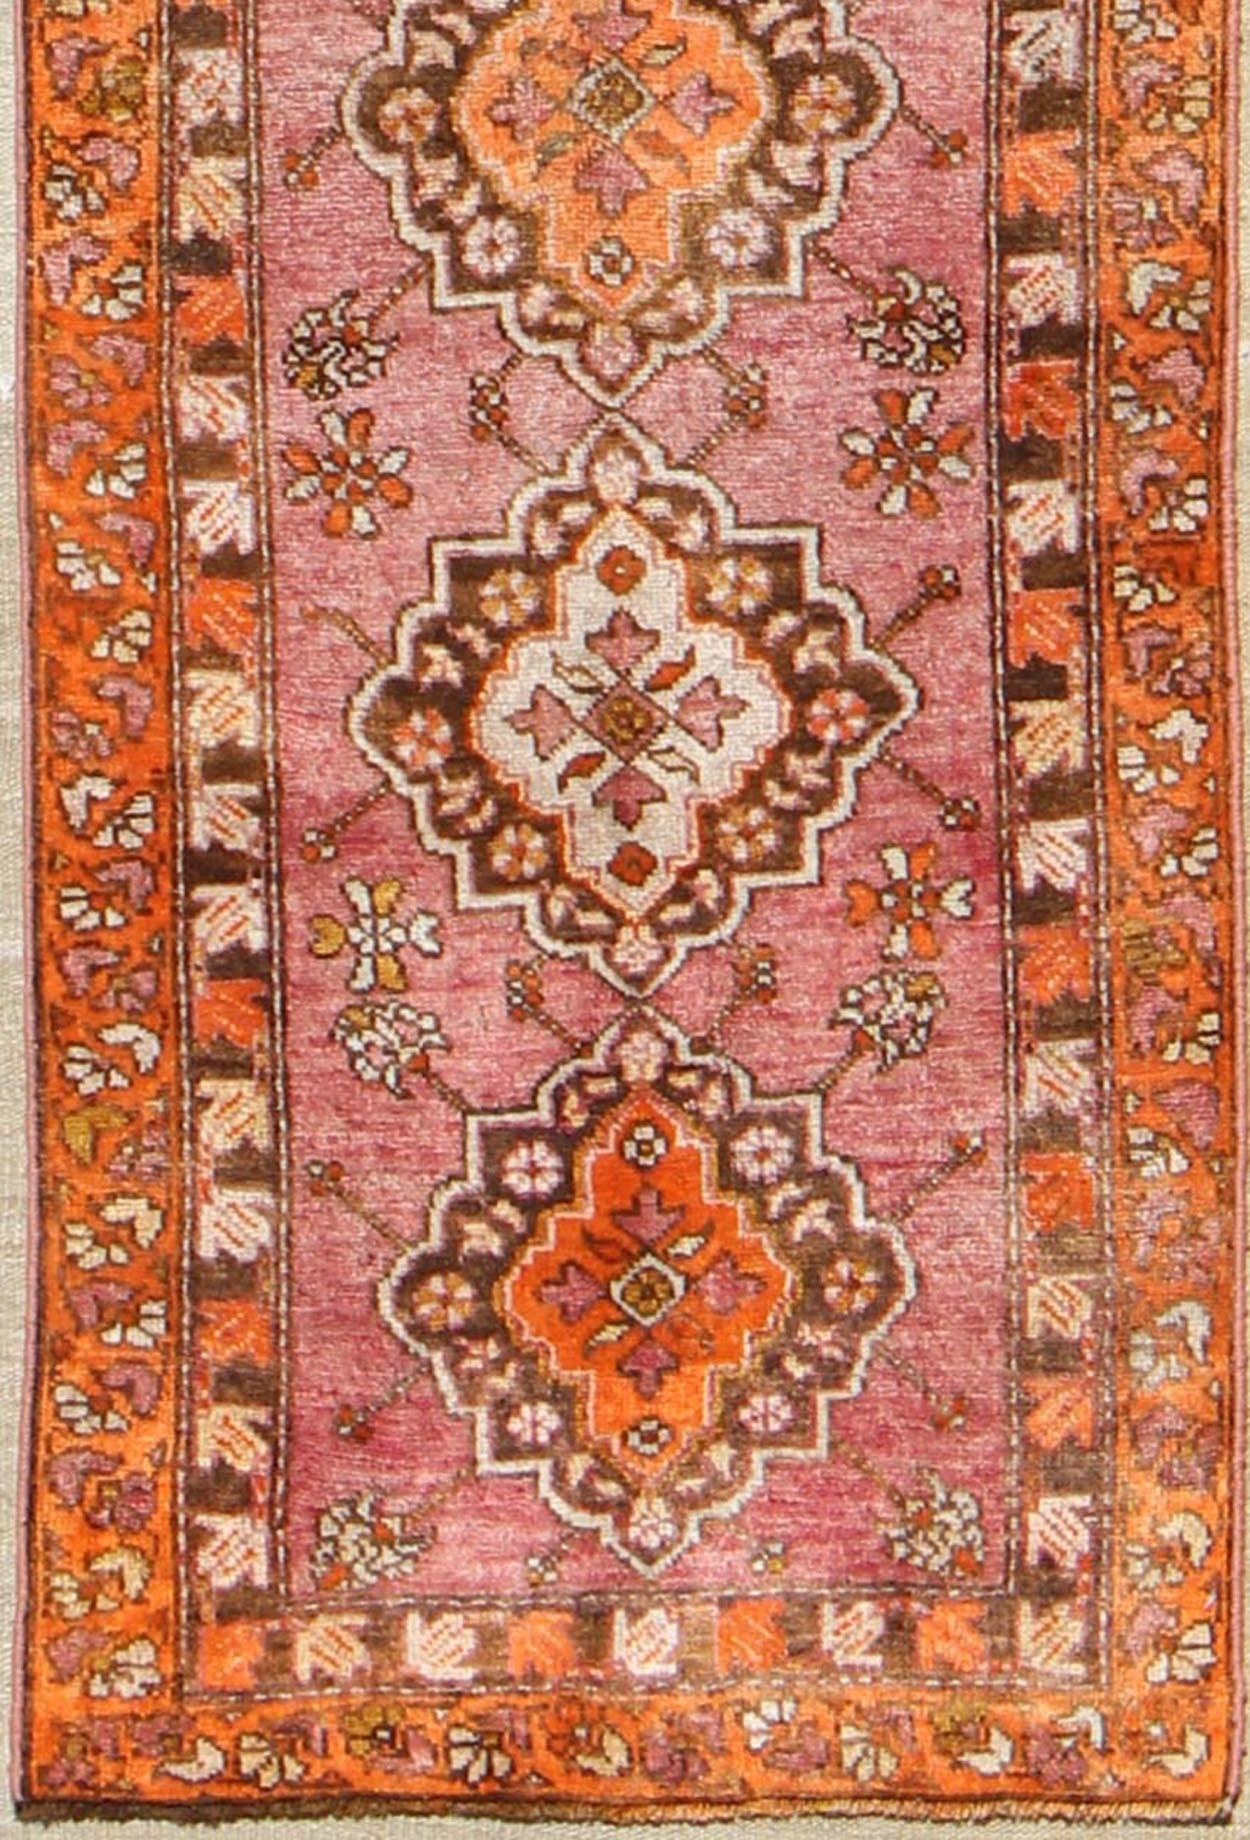 Antique Turkish Oushak runner with layered floral medallions and ornate borders, rug st-242, country of origin / type: Turkey / Oushak, circa 1930

This beautiful antique Oushak runner from 1930s Turkey features a Classic Oushak design, which is